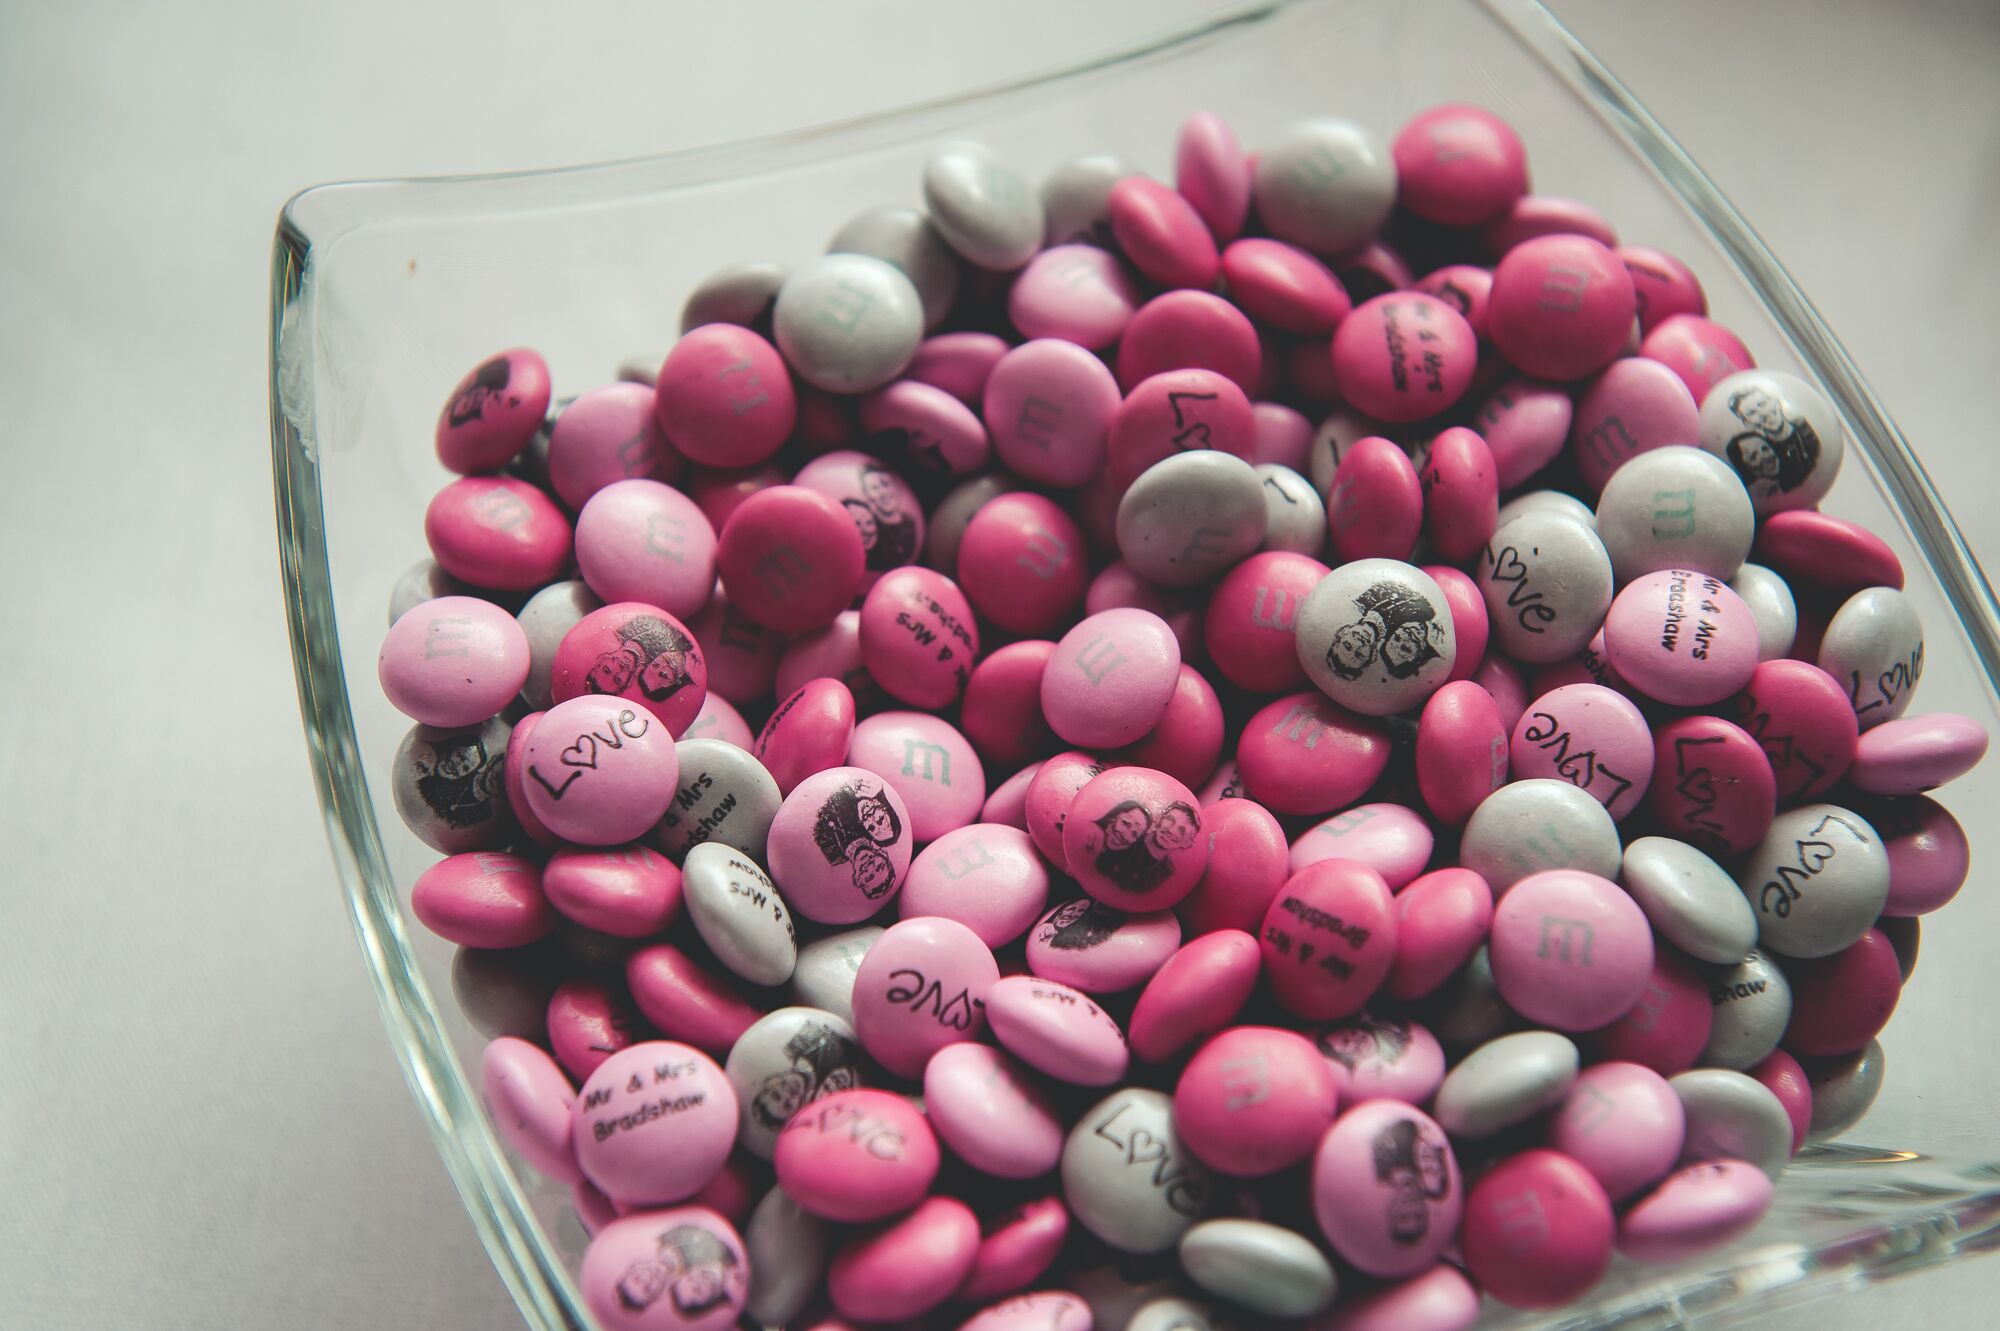 Personalized Pink and White M&Ms